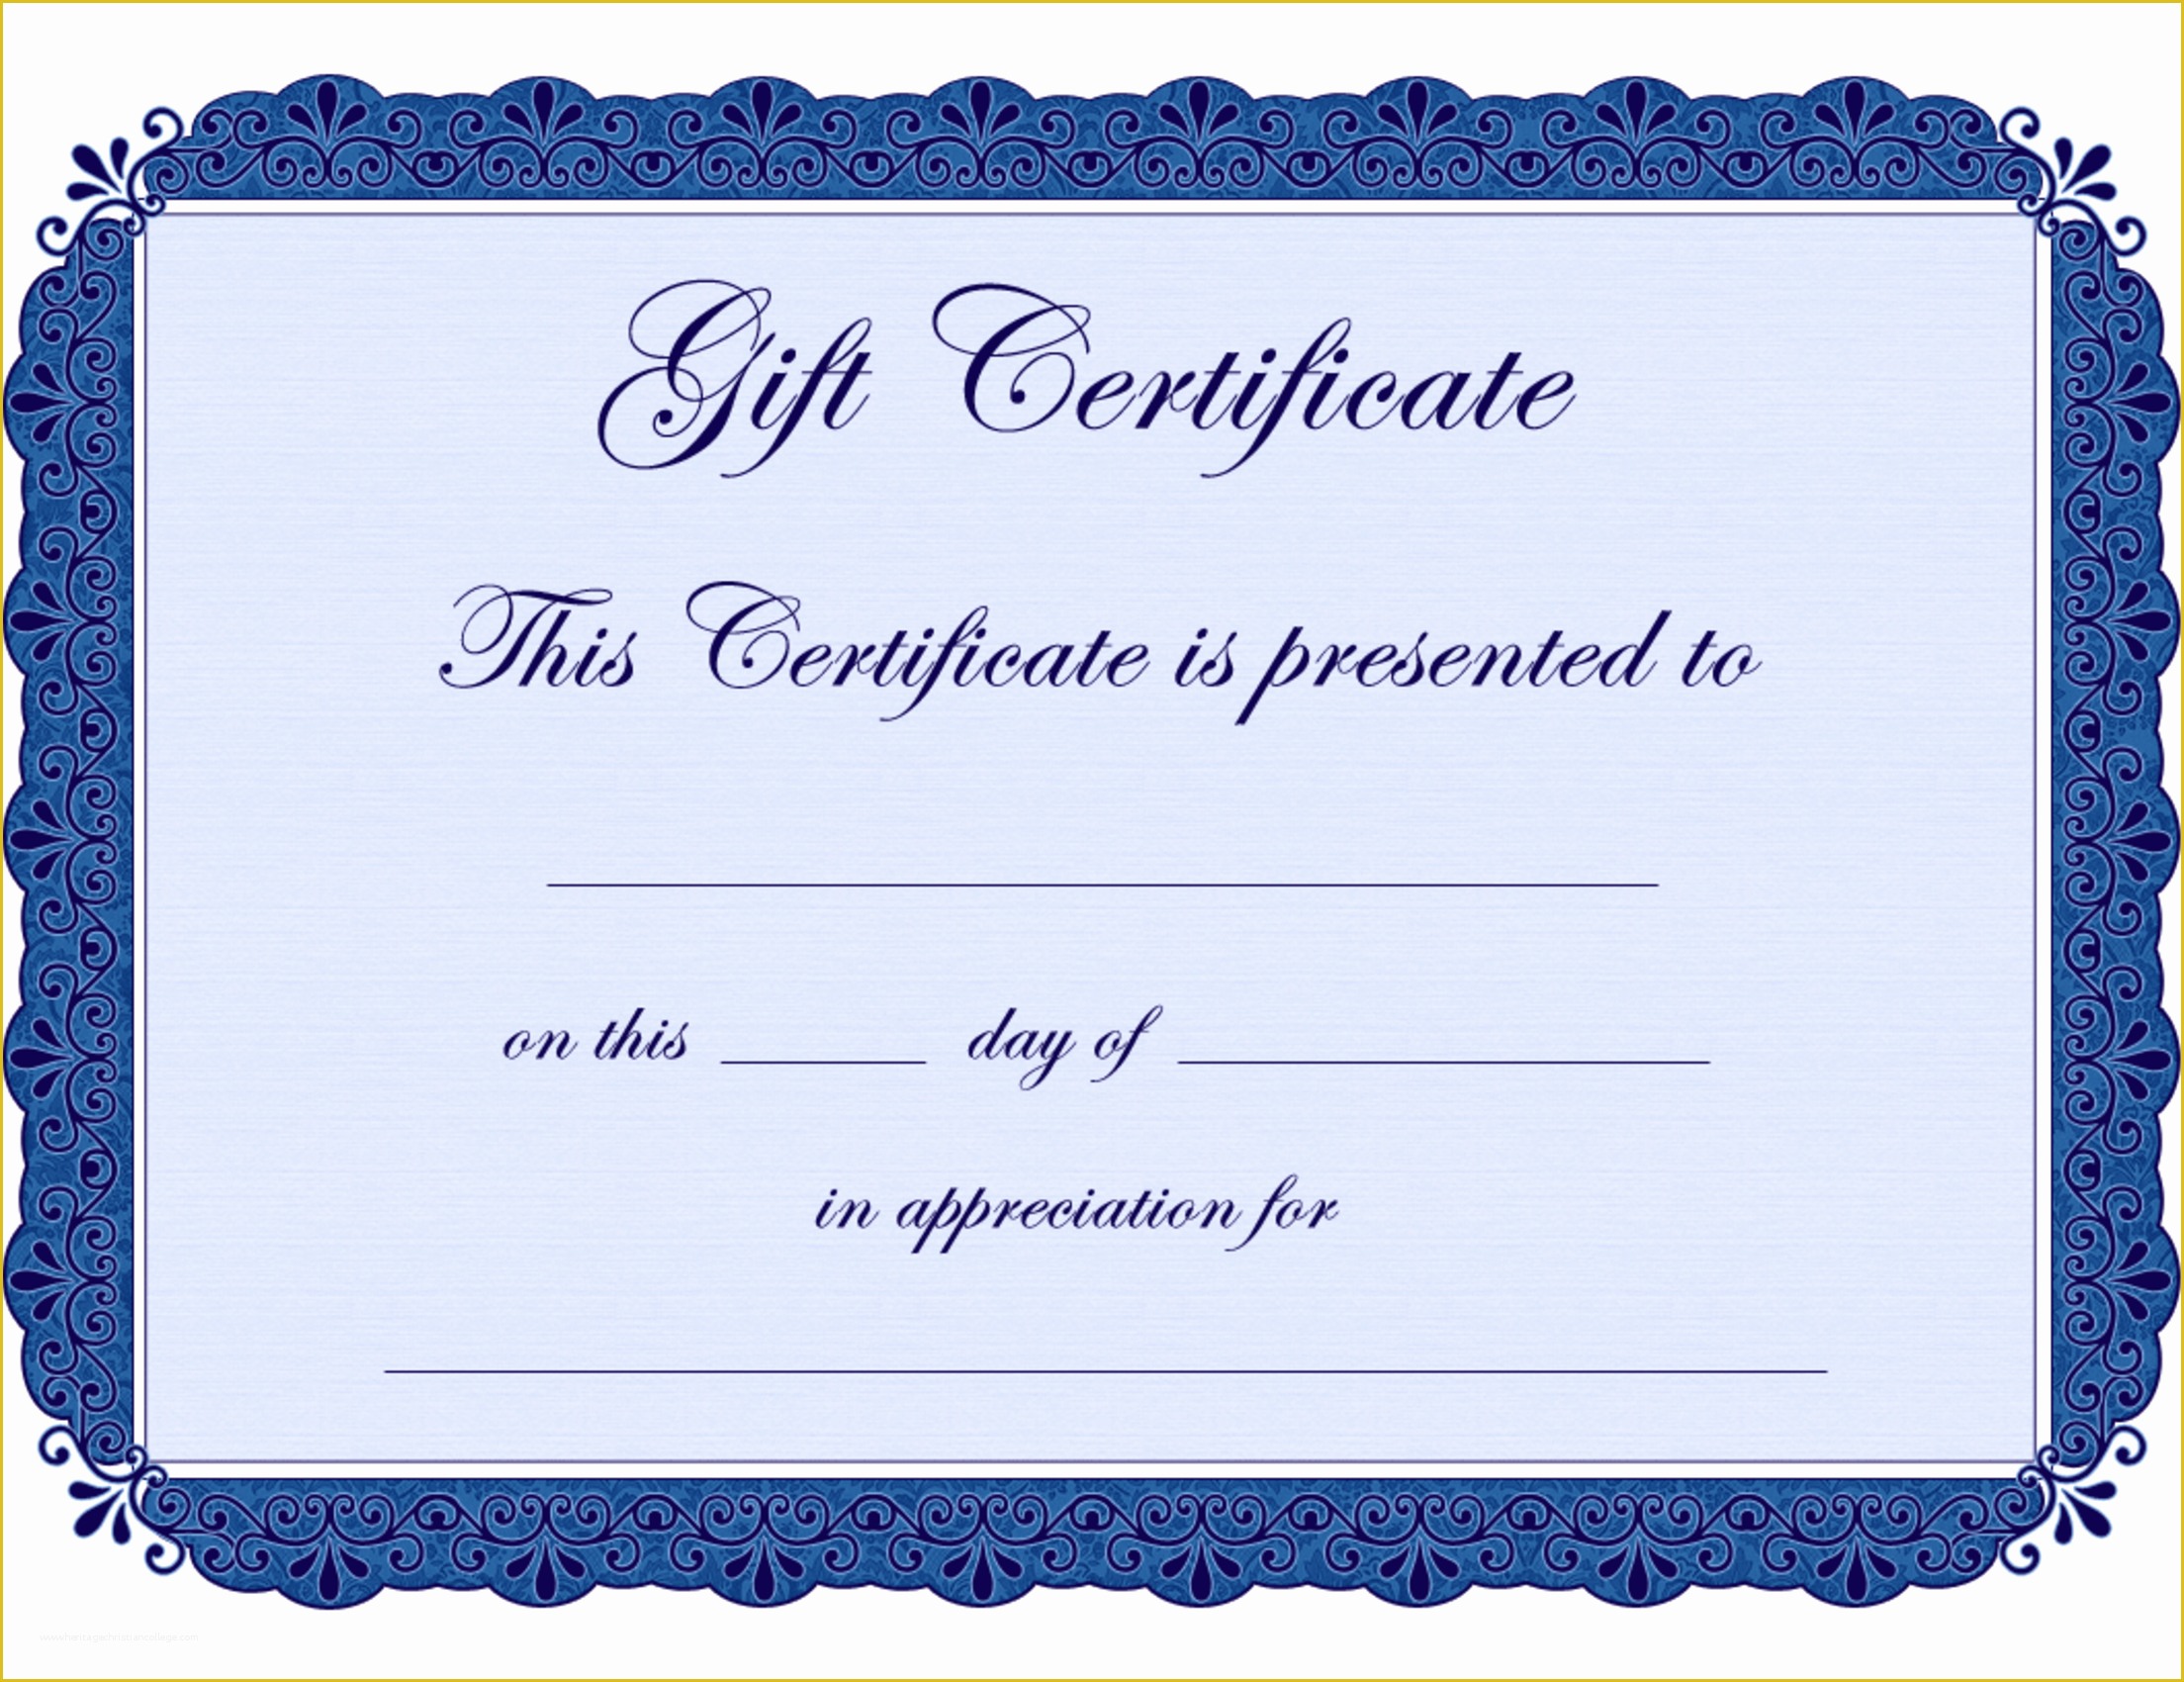 Free Gift Certificate Template Open Office Of Free Certificate Borders for Word Clipart Best